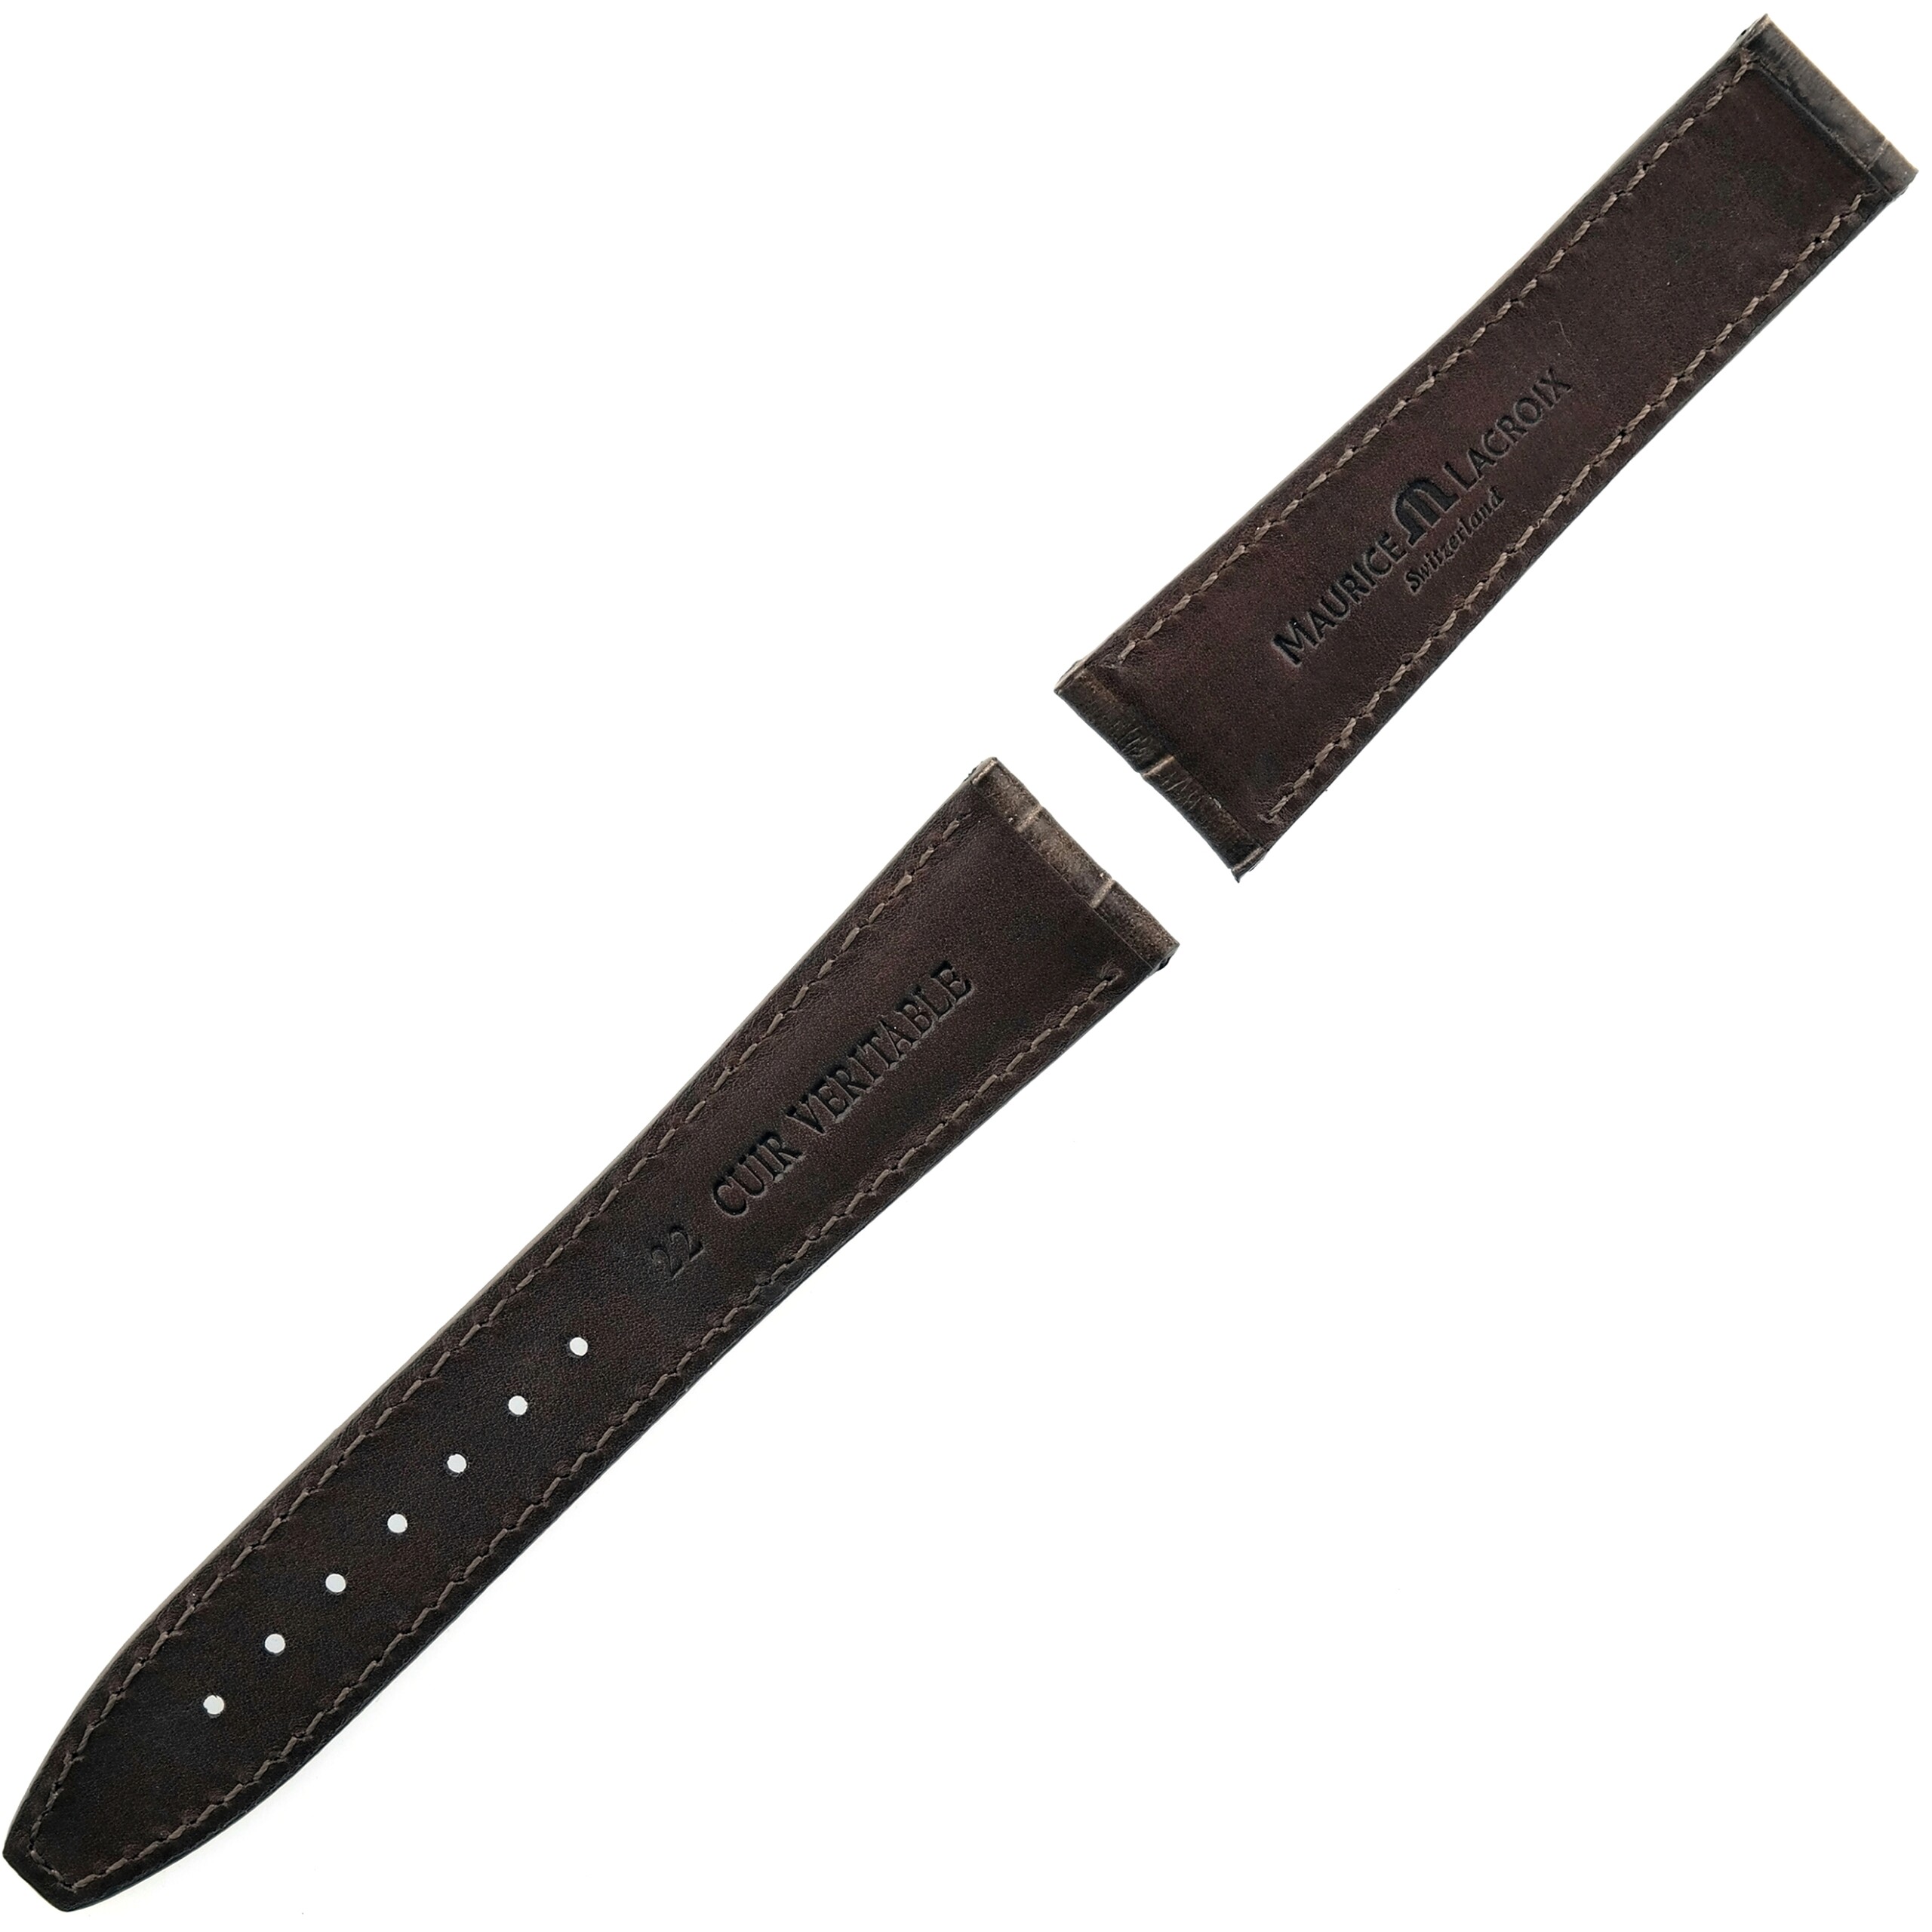 MAURICE LACROIX - Leather Watch Strap - 22/18 80/120 - Swiss Made - Brown